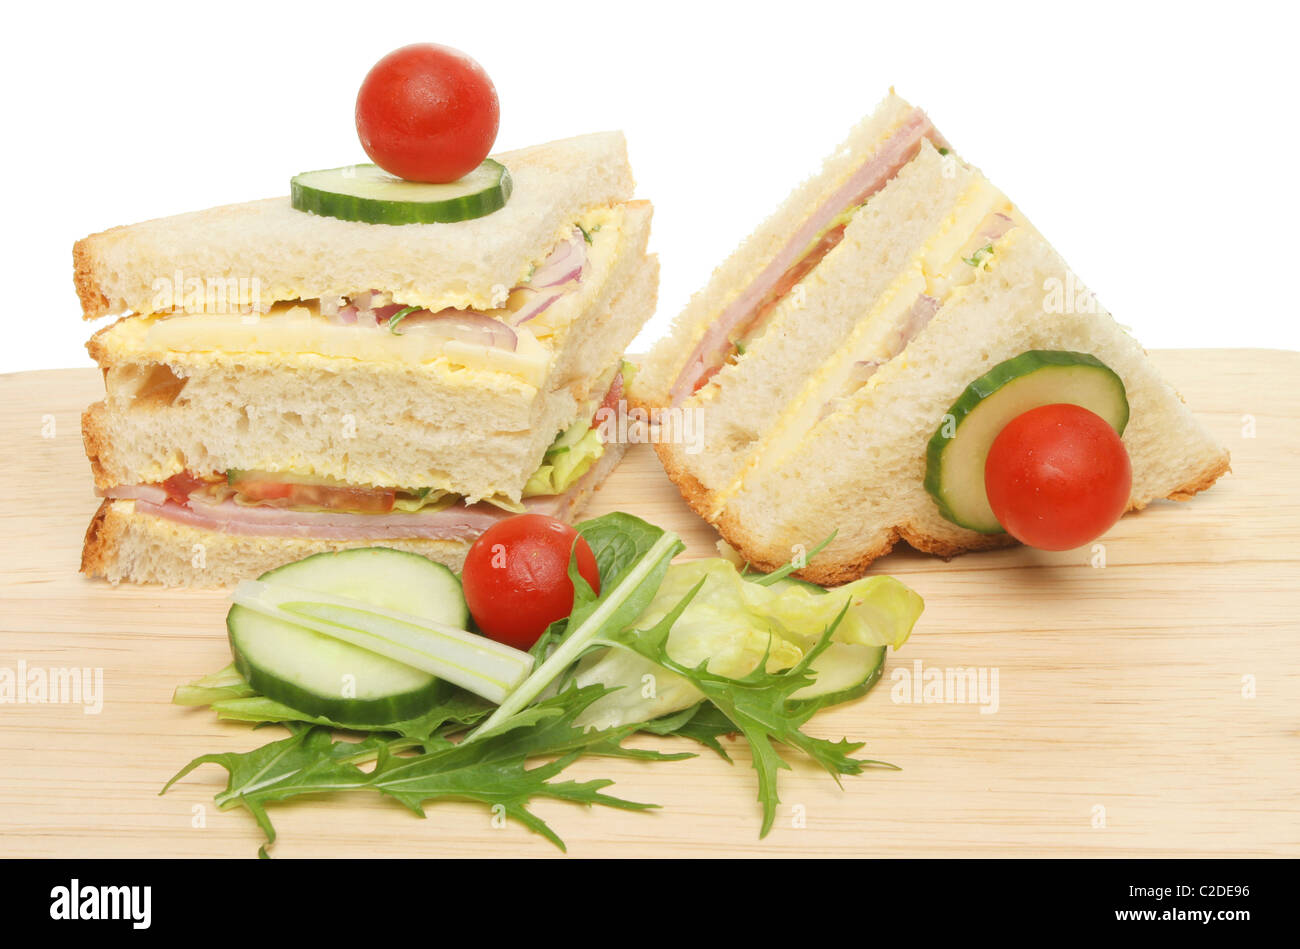 Ham and cheese club sandwich with salad garnish on a wooden board Stock Photo